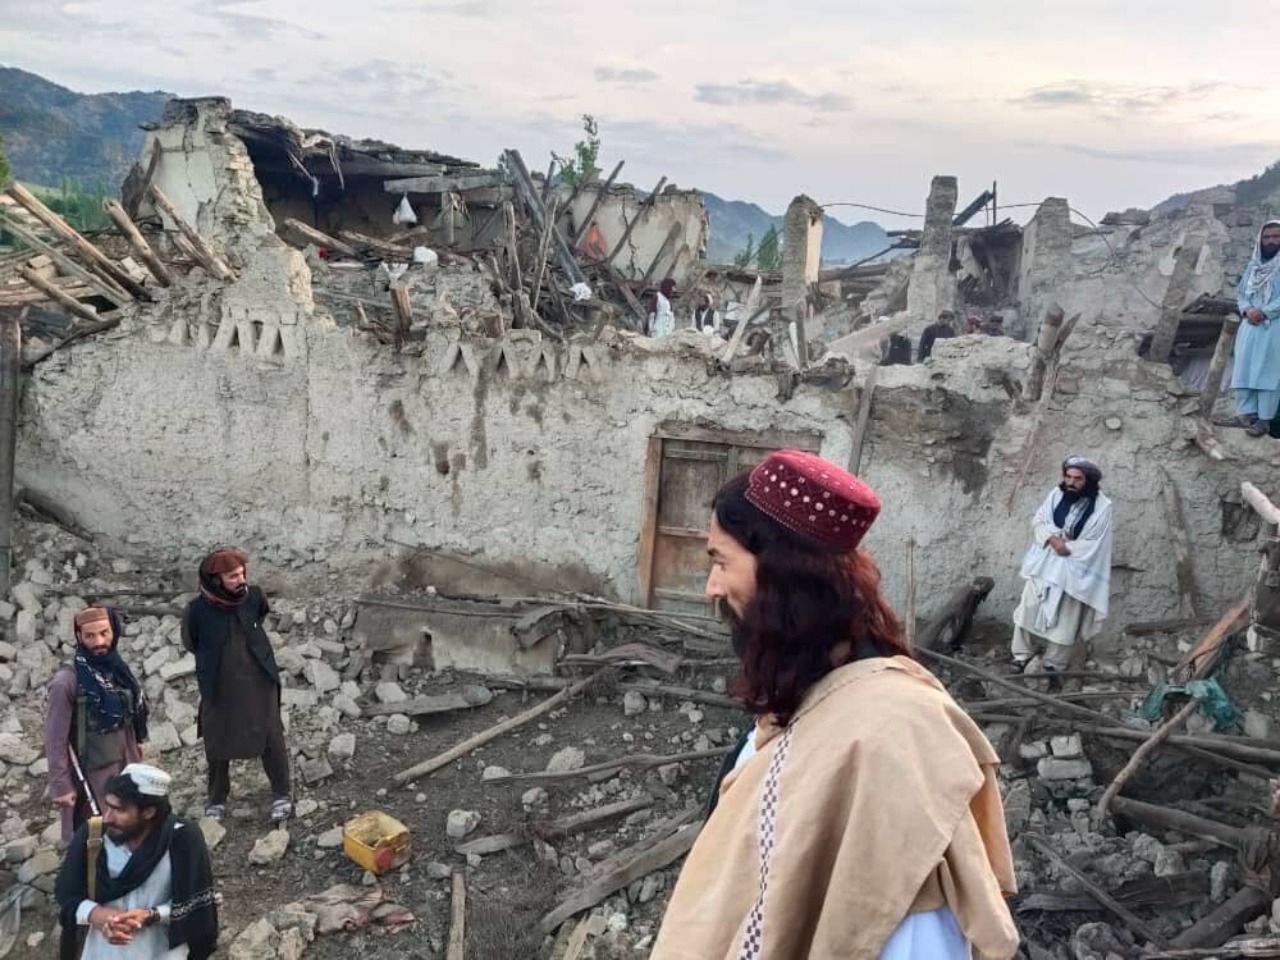 In this photo released by a state-run news agency Bakhtar, Afghans look at destruction caused by an earthquake in the province of Paktika, eastern Afghanistan, Wednesday, June 22,